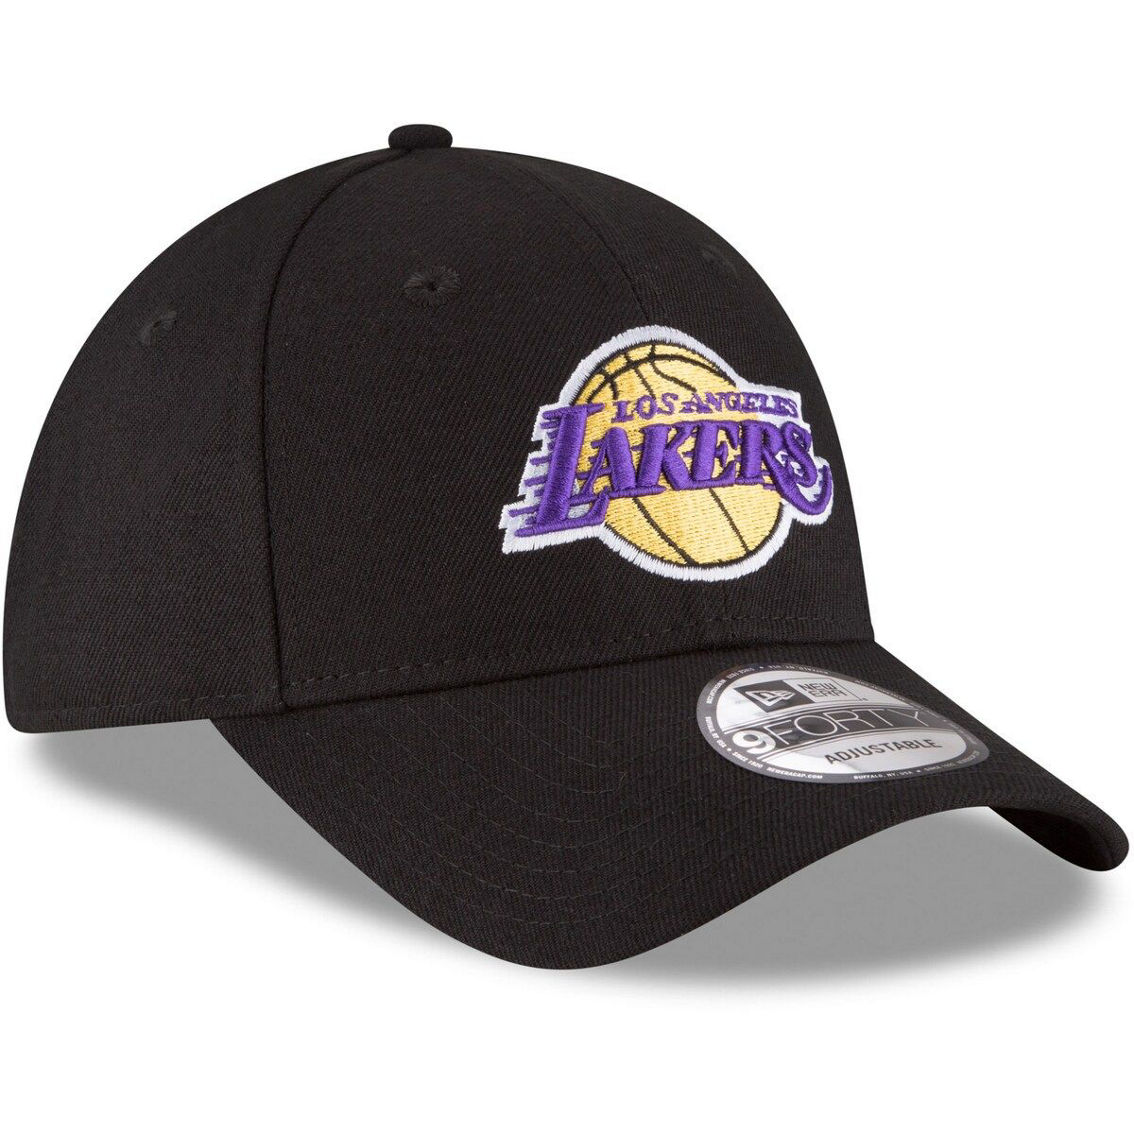 New Era Men's Black Los Angeles Lakers Official Team Color The League 9FORTY Adjustable Hat - Image 4 of 4